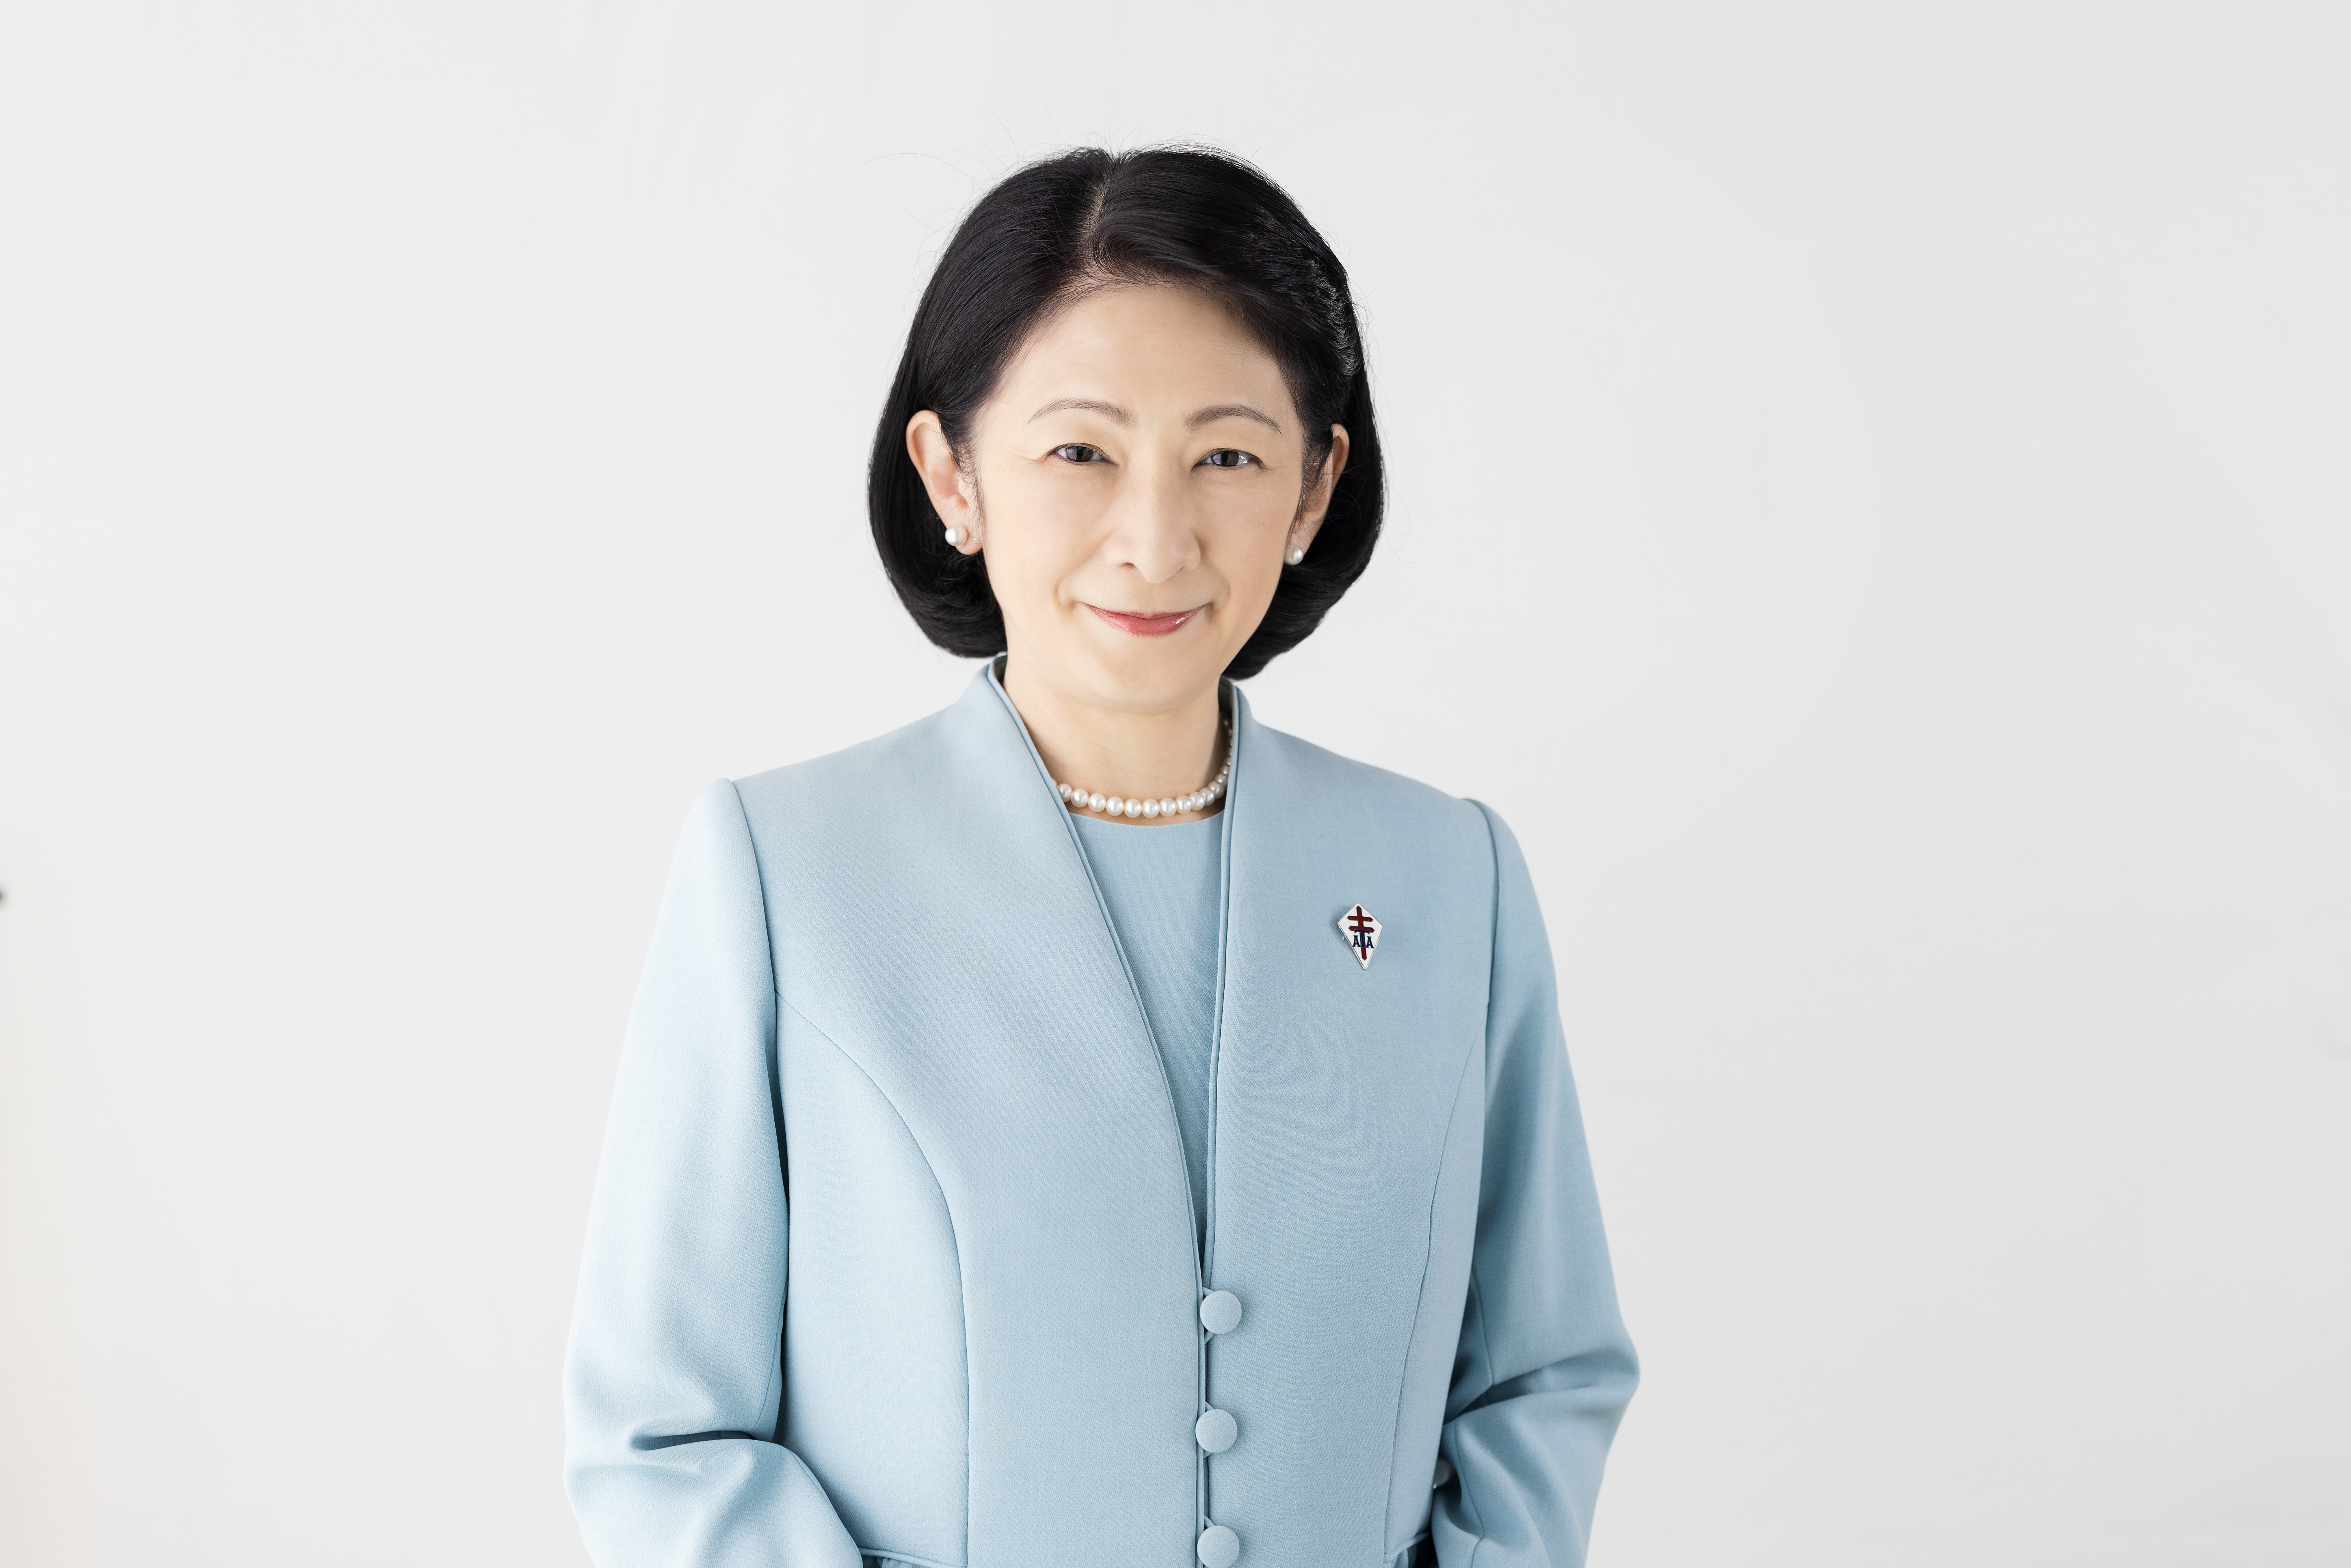 Her Imperial Highness The Crown Princess of Japan